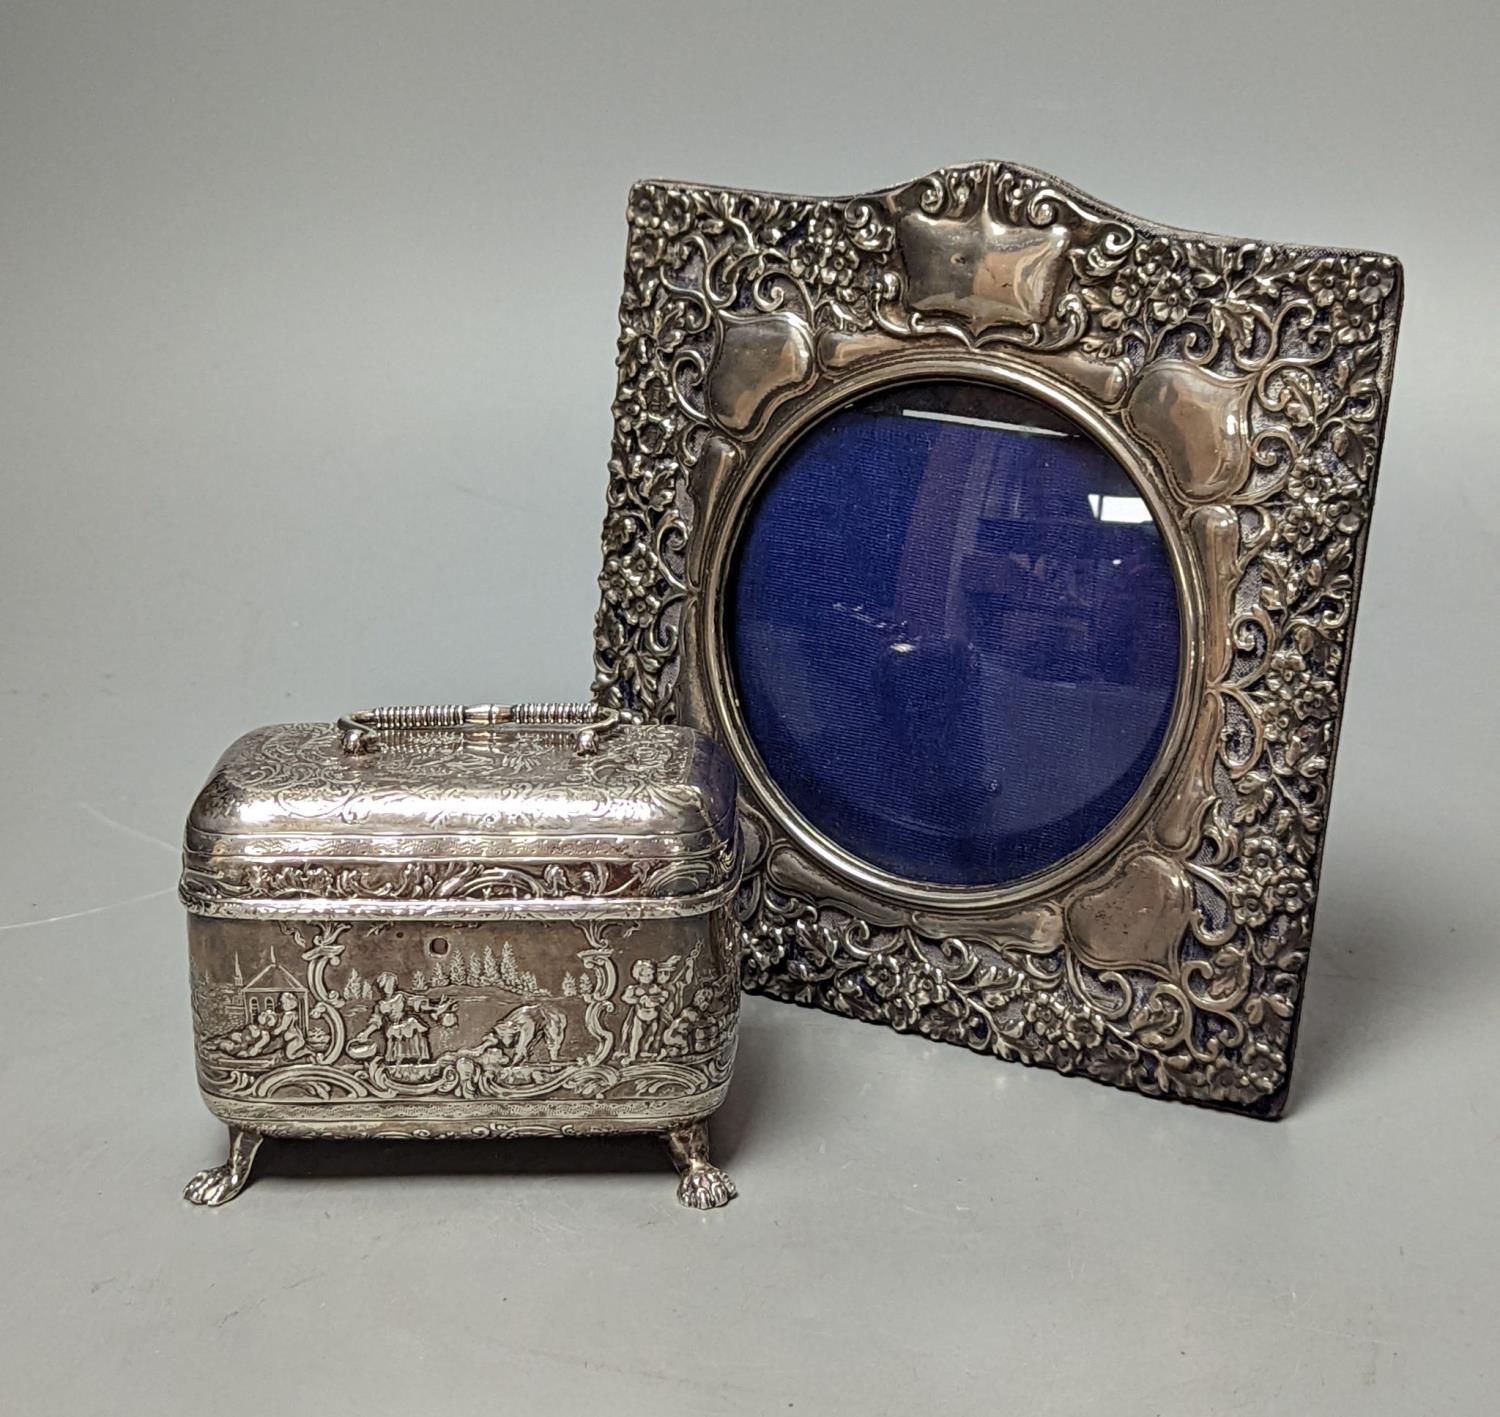 An Edwardian repousse silver mounted photograph frame, Birmingham, 1901, 15.8cm and a small white